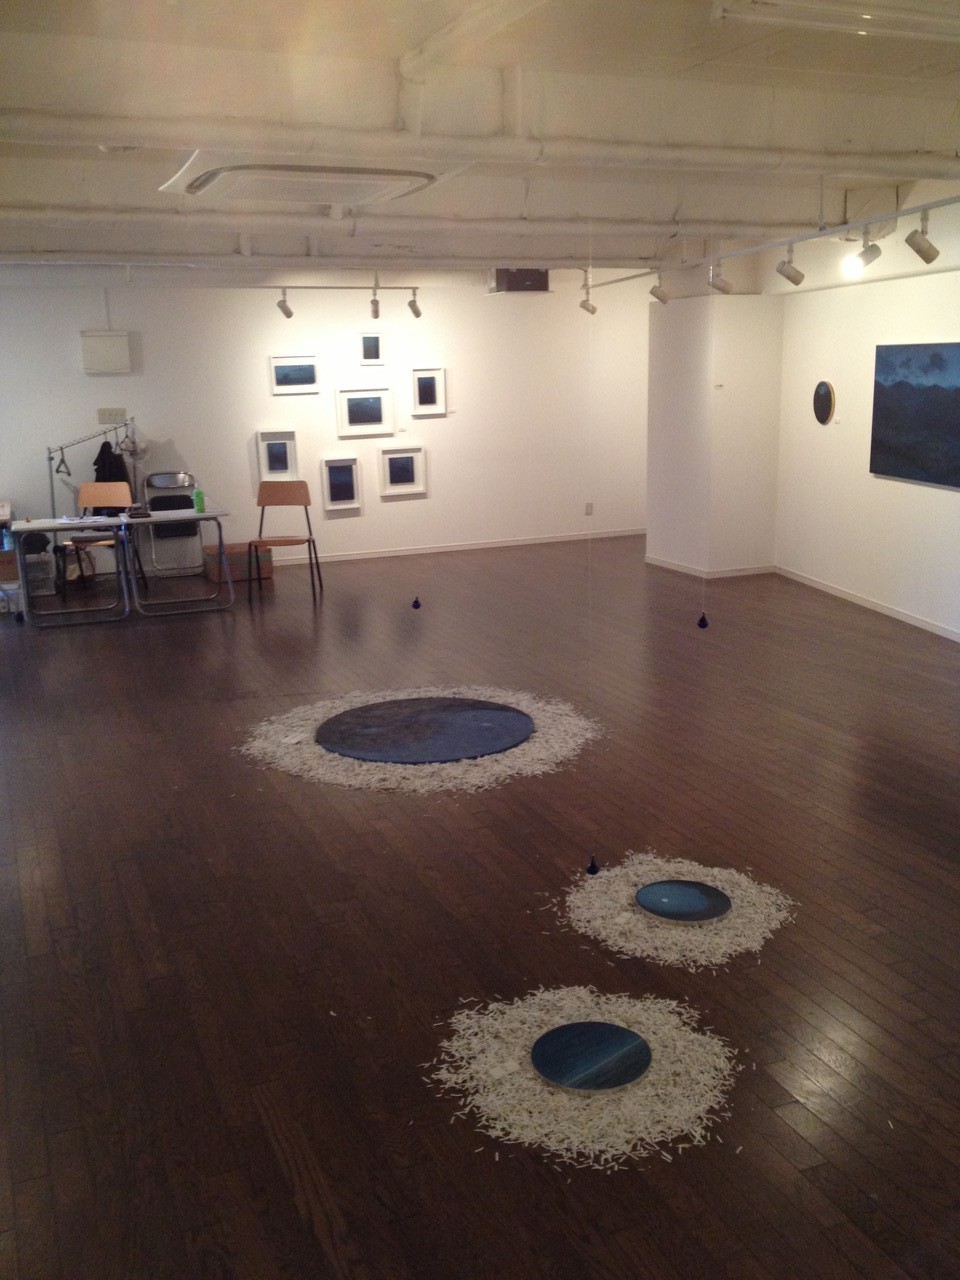 「youichi kayama exibition」@The Artcomplex Center of Tokyo .ACT 5. 2013.3.5-3.10